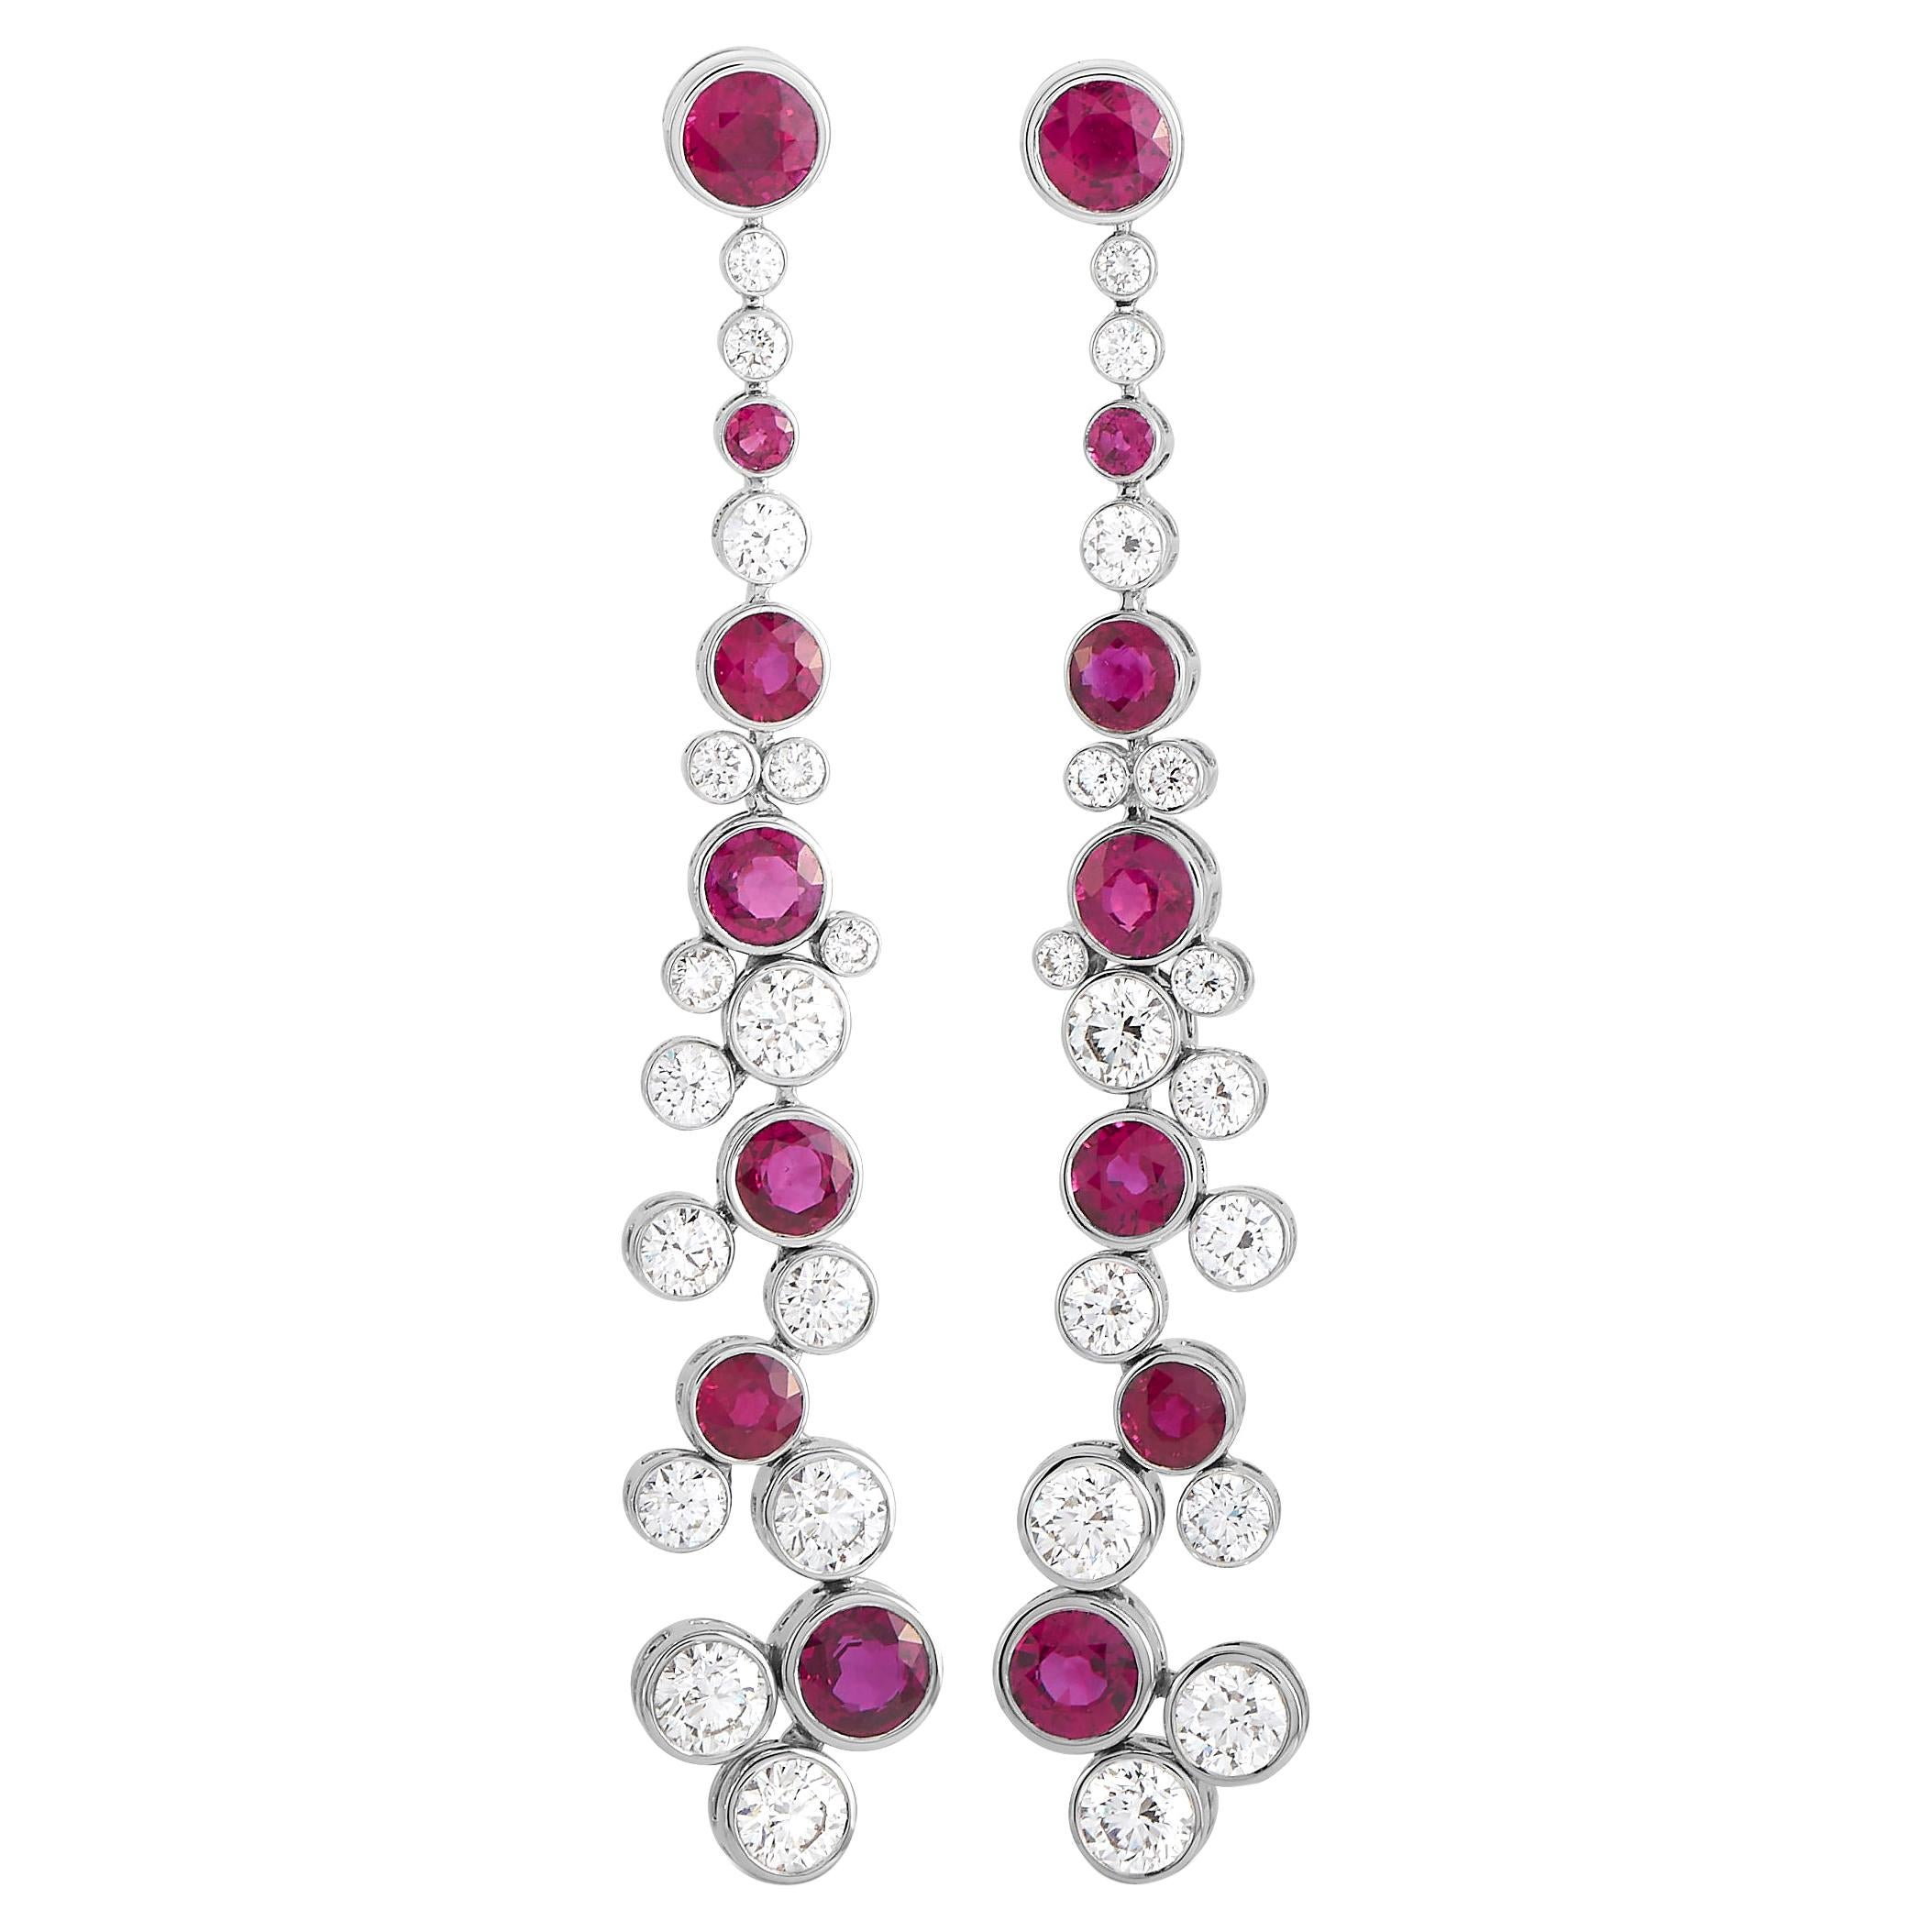 Graff 18K White Gold 3.97 Ct Diamond and Ruby Infinity Drop Earrings